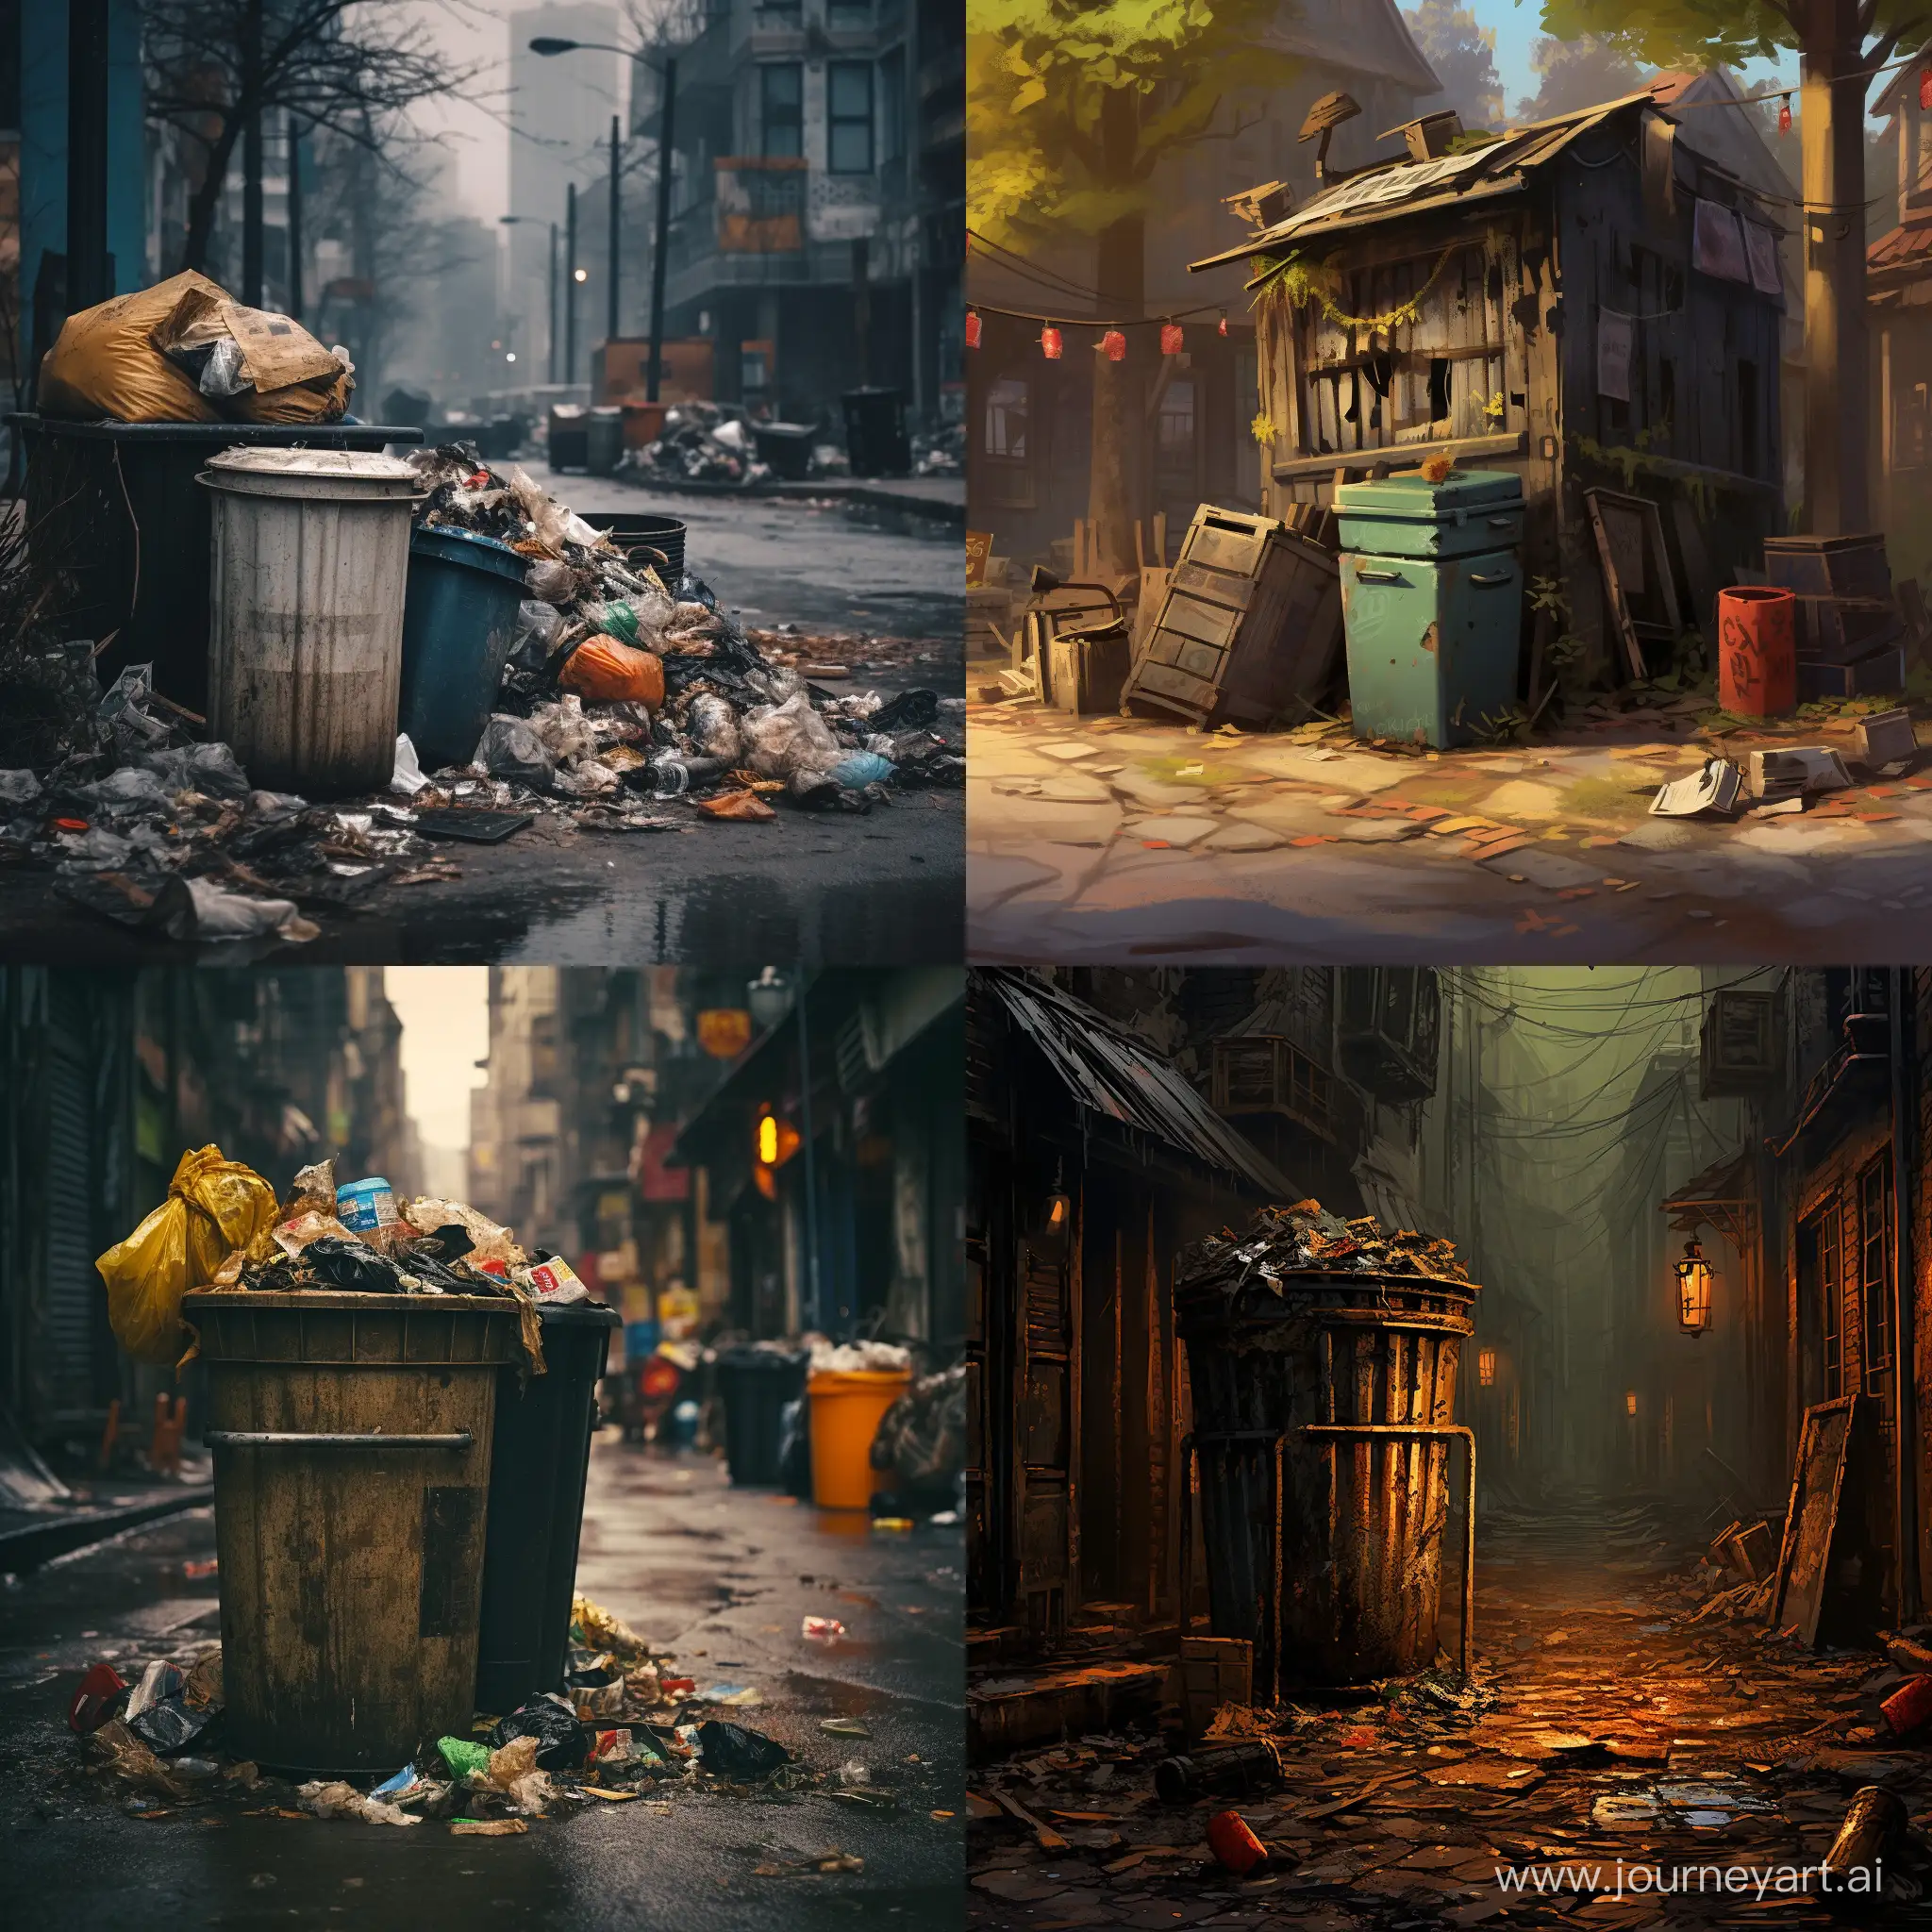 Urban-Neglect-Abandoned-Trash-Can-in-the-Heart-of-the-City